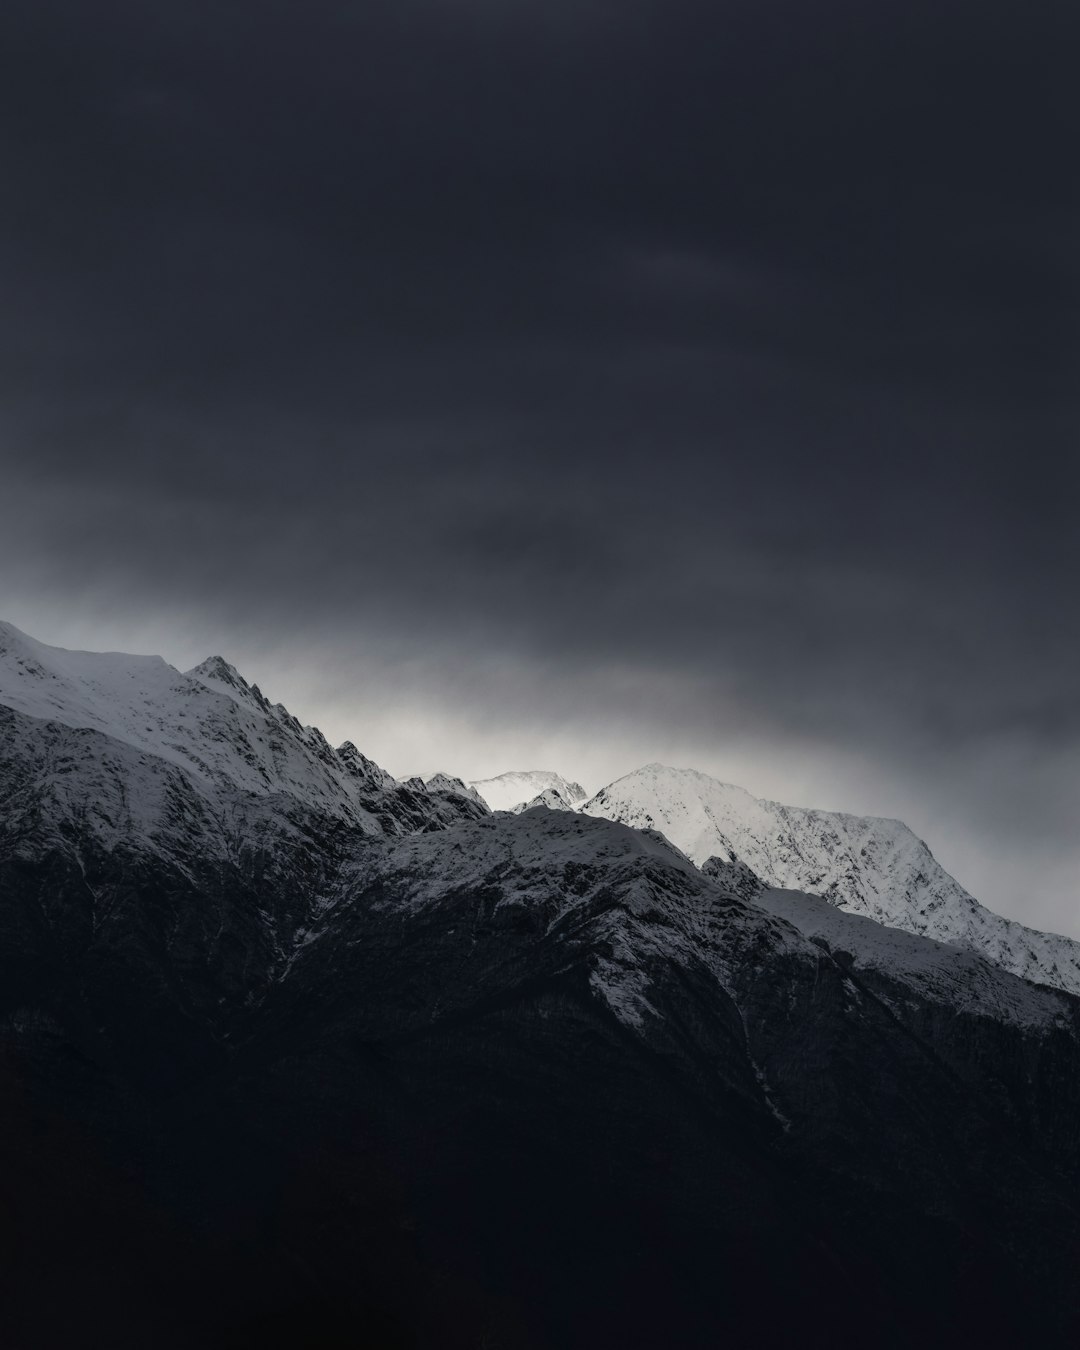 snow capped mountain under cloudy sky during daytime